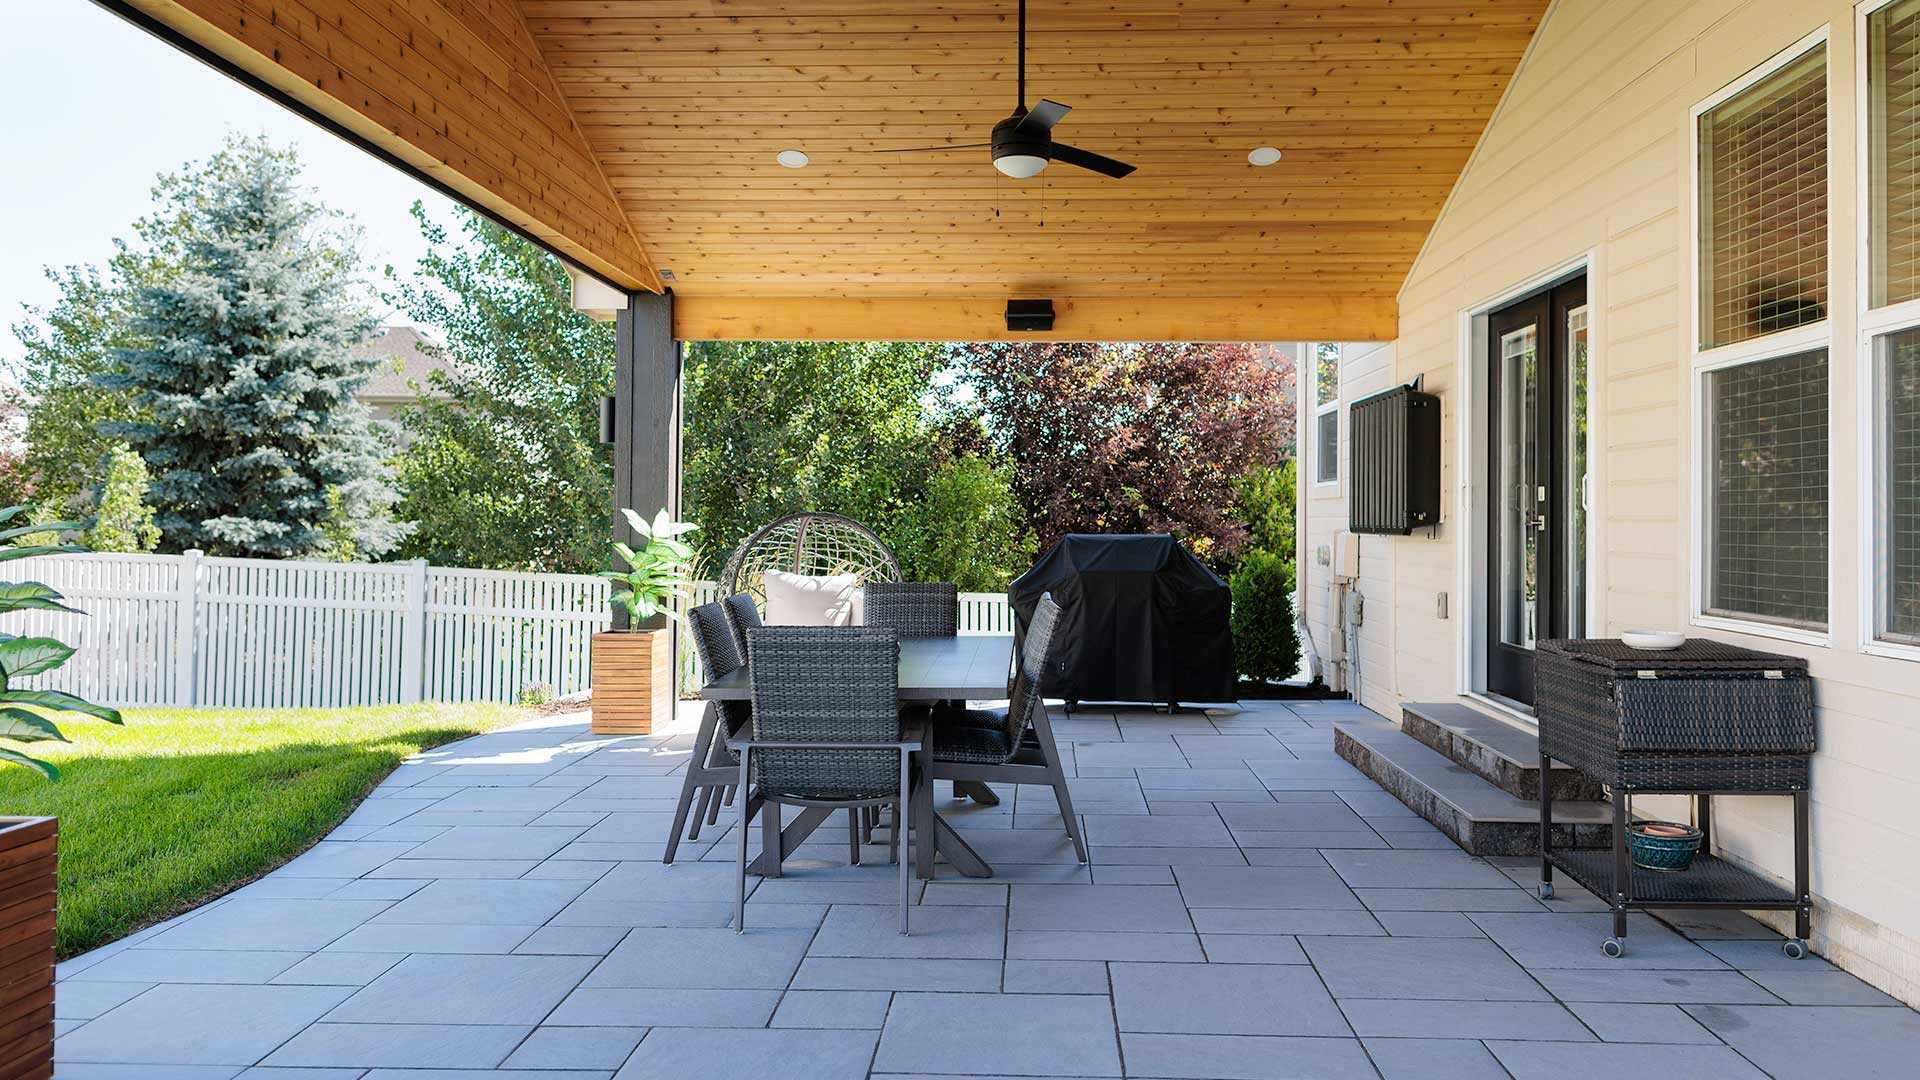 Designing a New Patio? Consider Pavers!